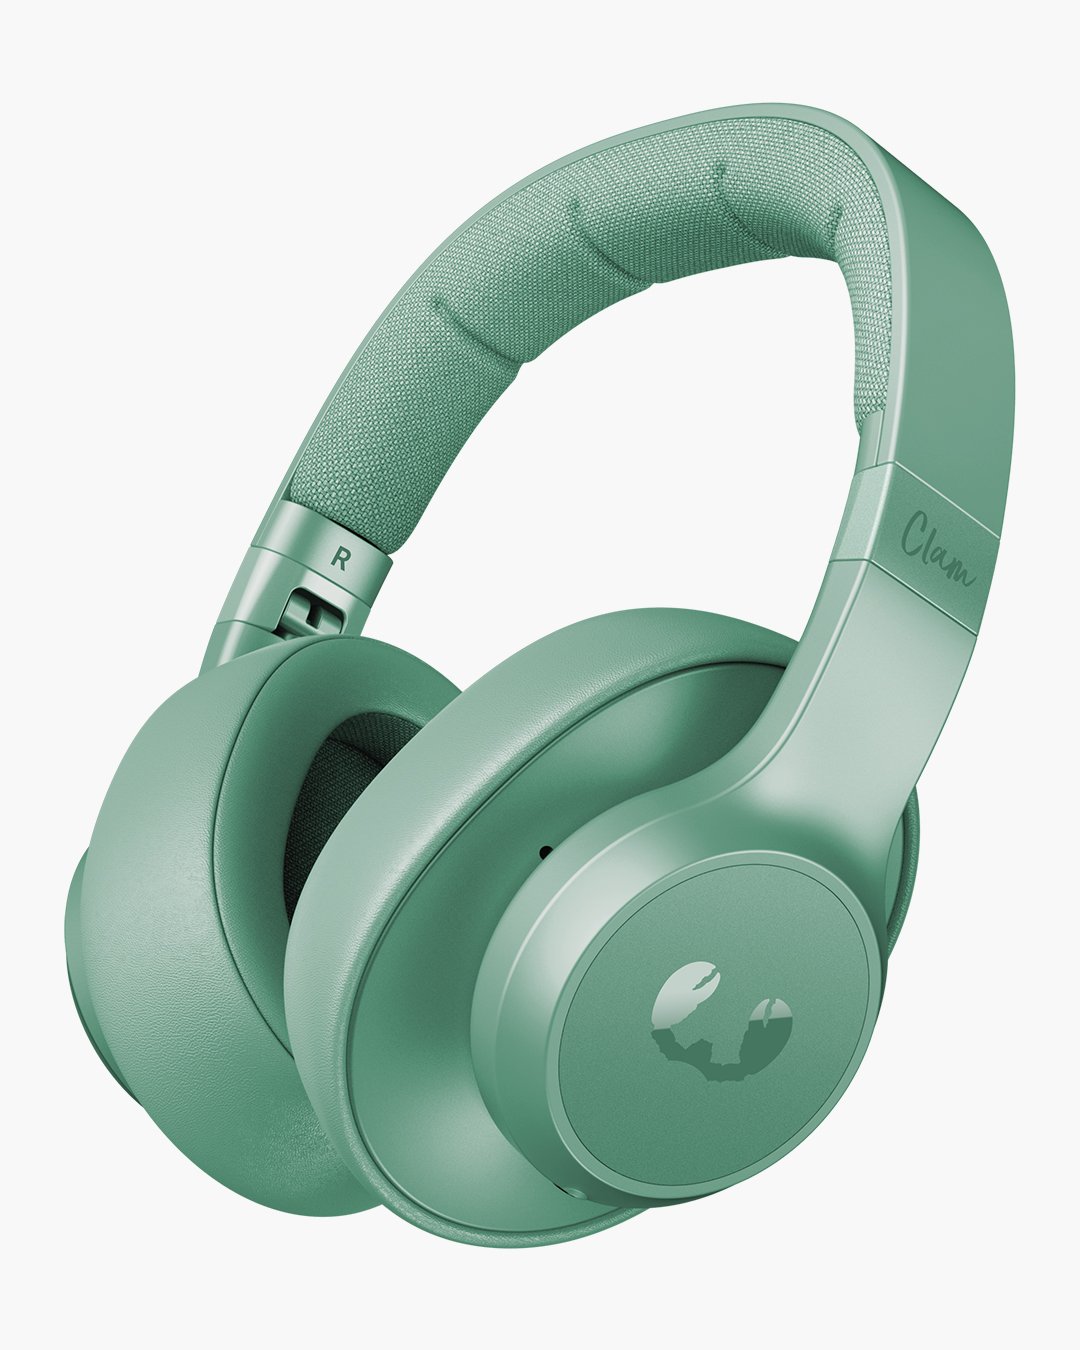 Fresh 'n Rebel - Clam ANC - Wireless over-ear headphones with active noise cancelling - Misty Mint